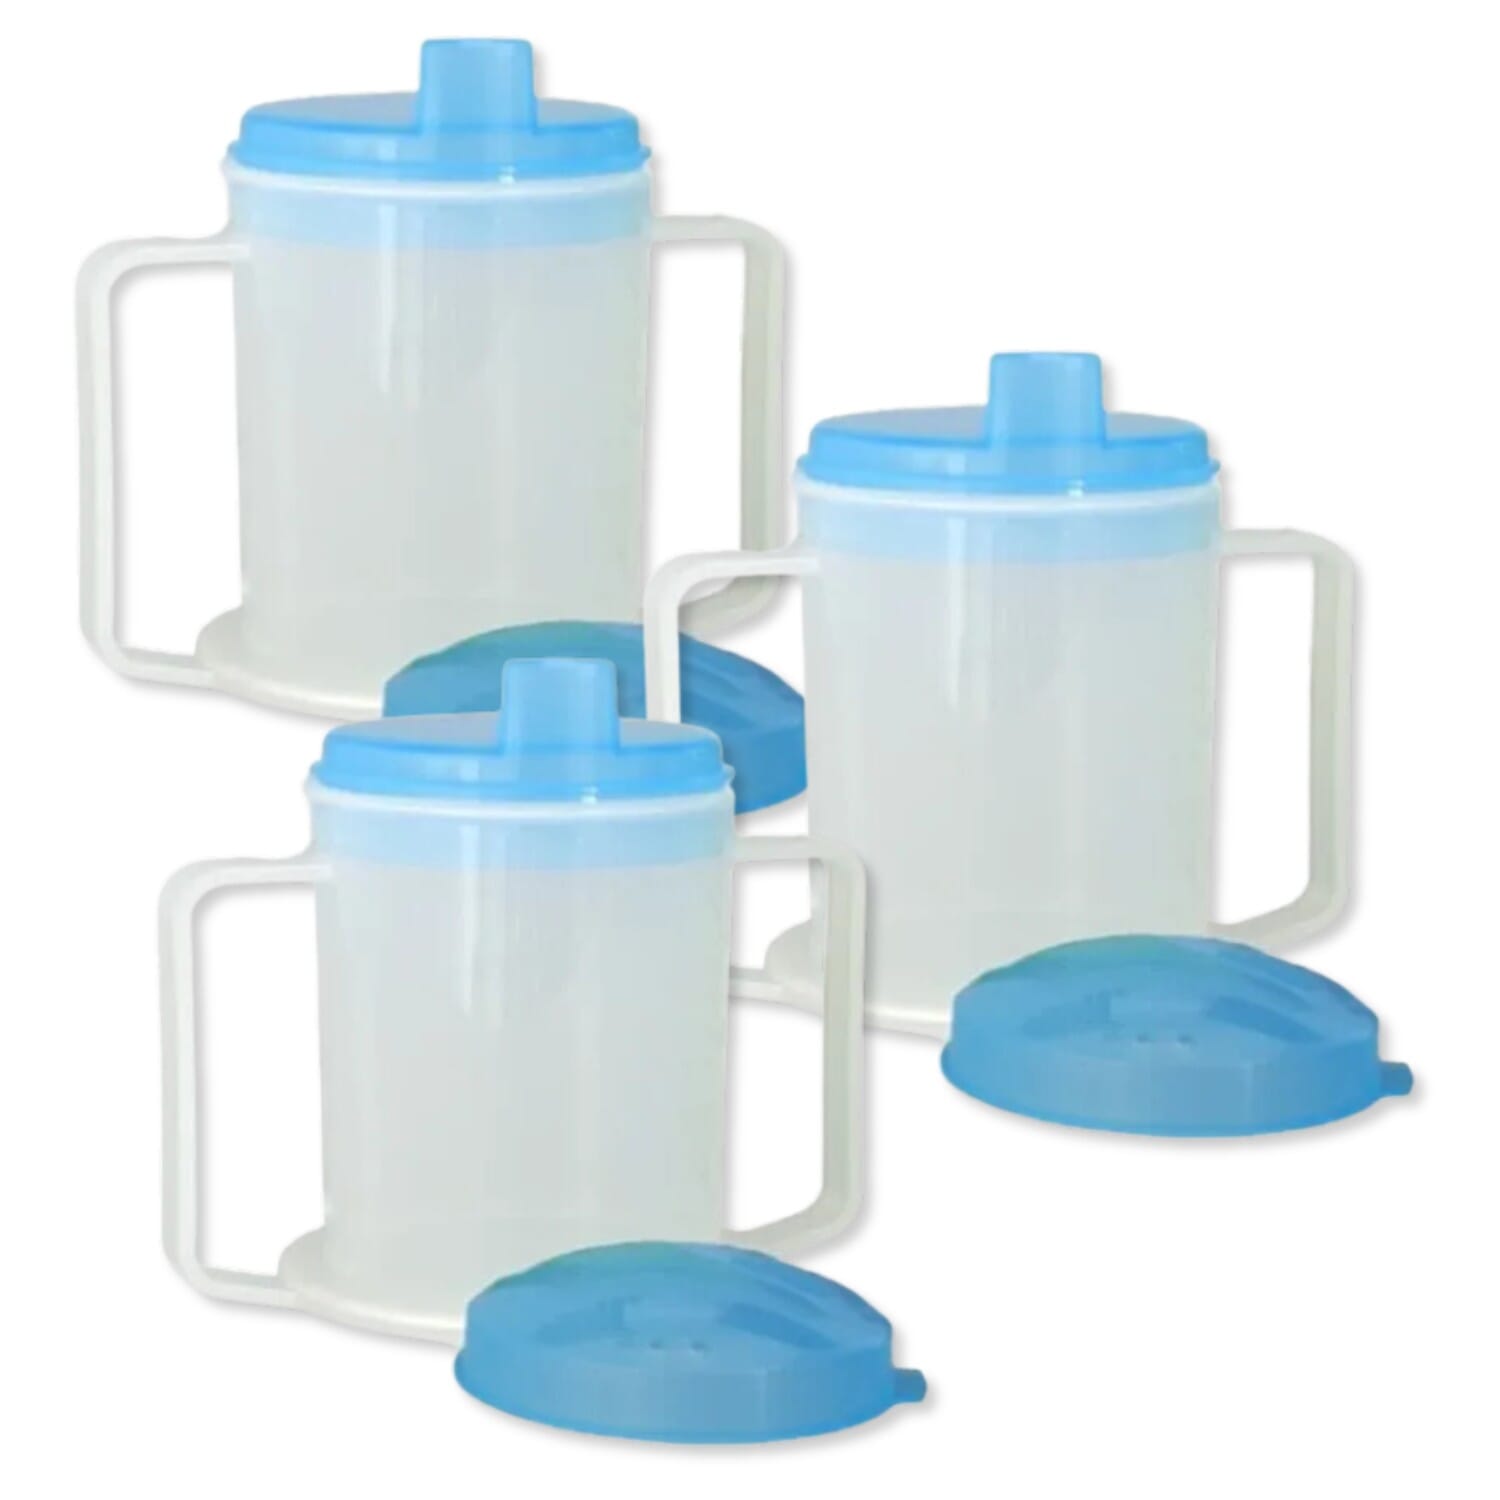 View Easy Sip Adult Drinking Cup Pack of 3 information